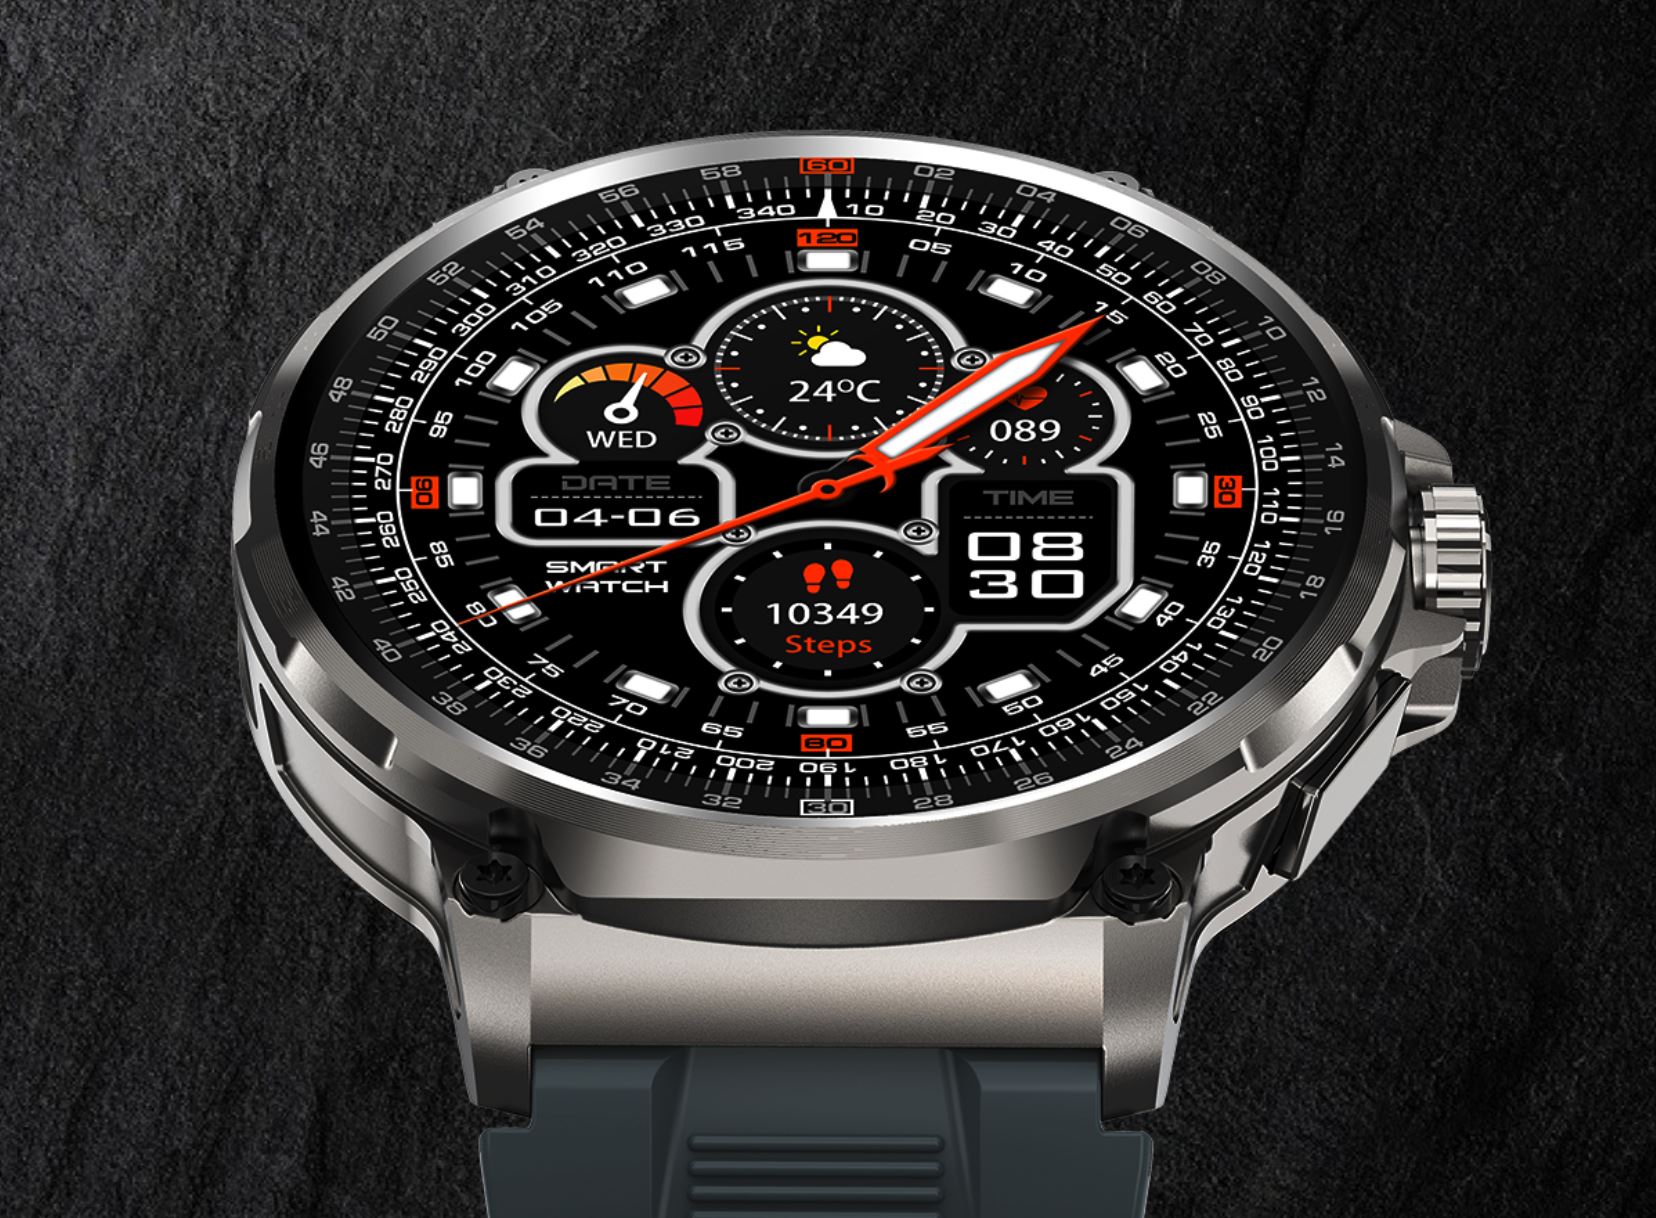 Waterproof Rogbid Tank M3 smartwatch with large display and huge battery  launches with over 50% discount -  News